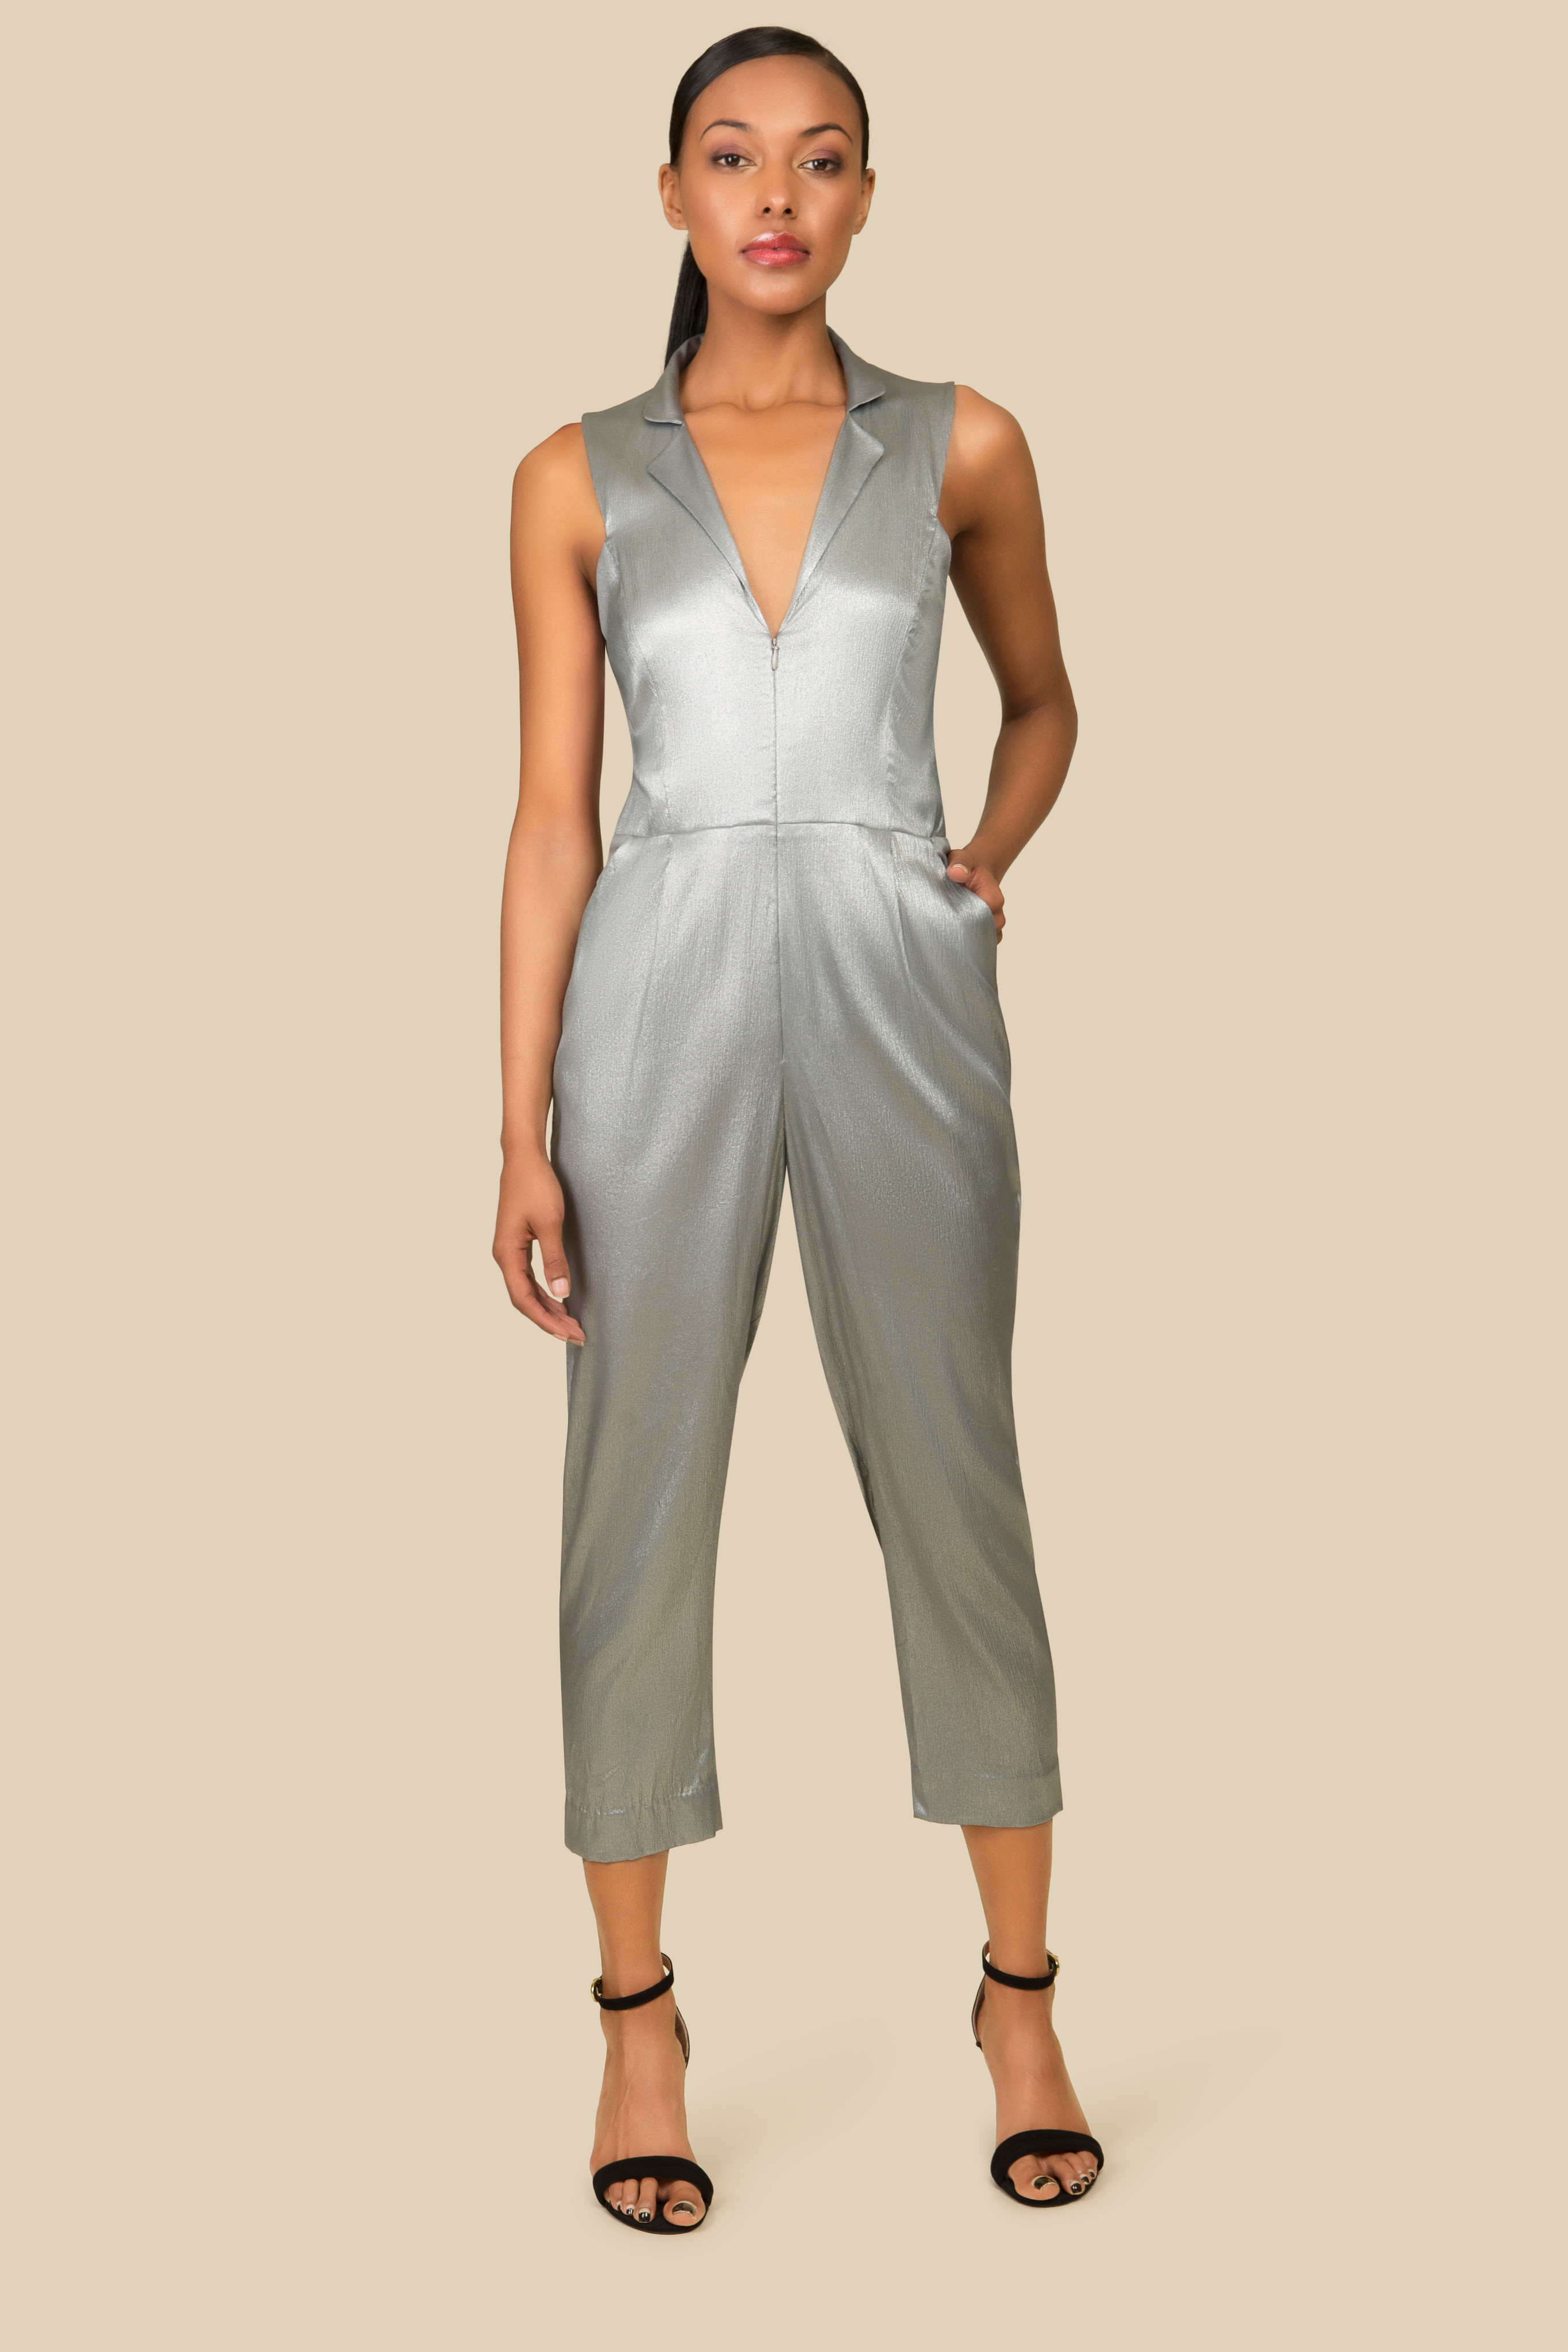 Silver Silk Jumpsuit with front zipper